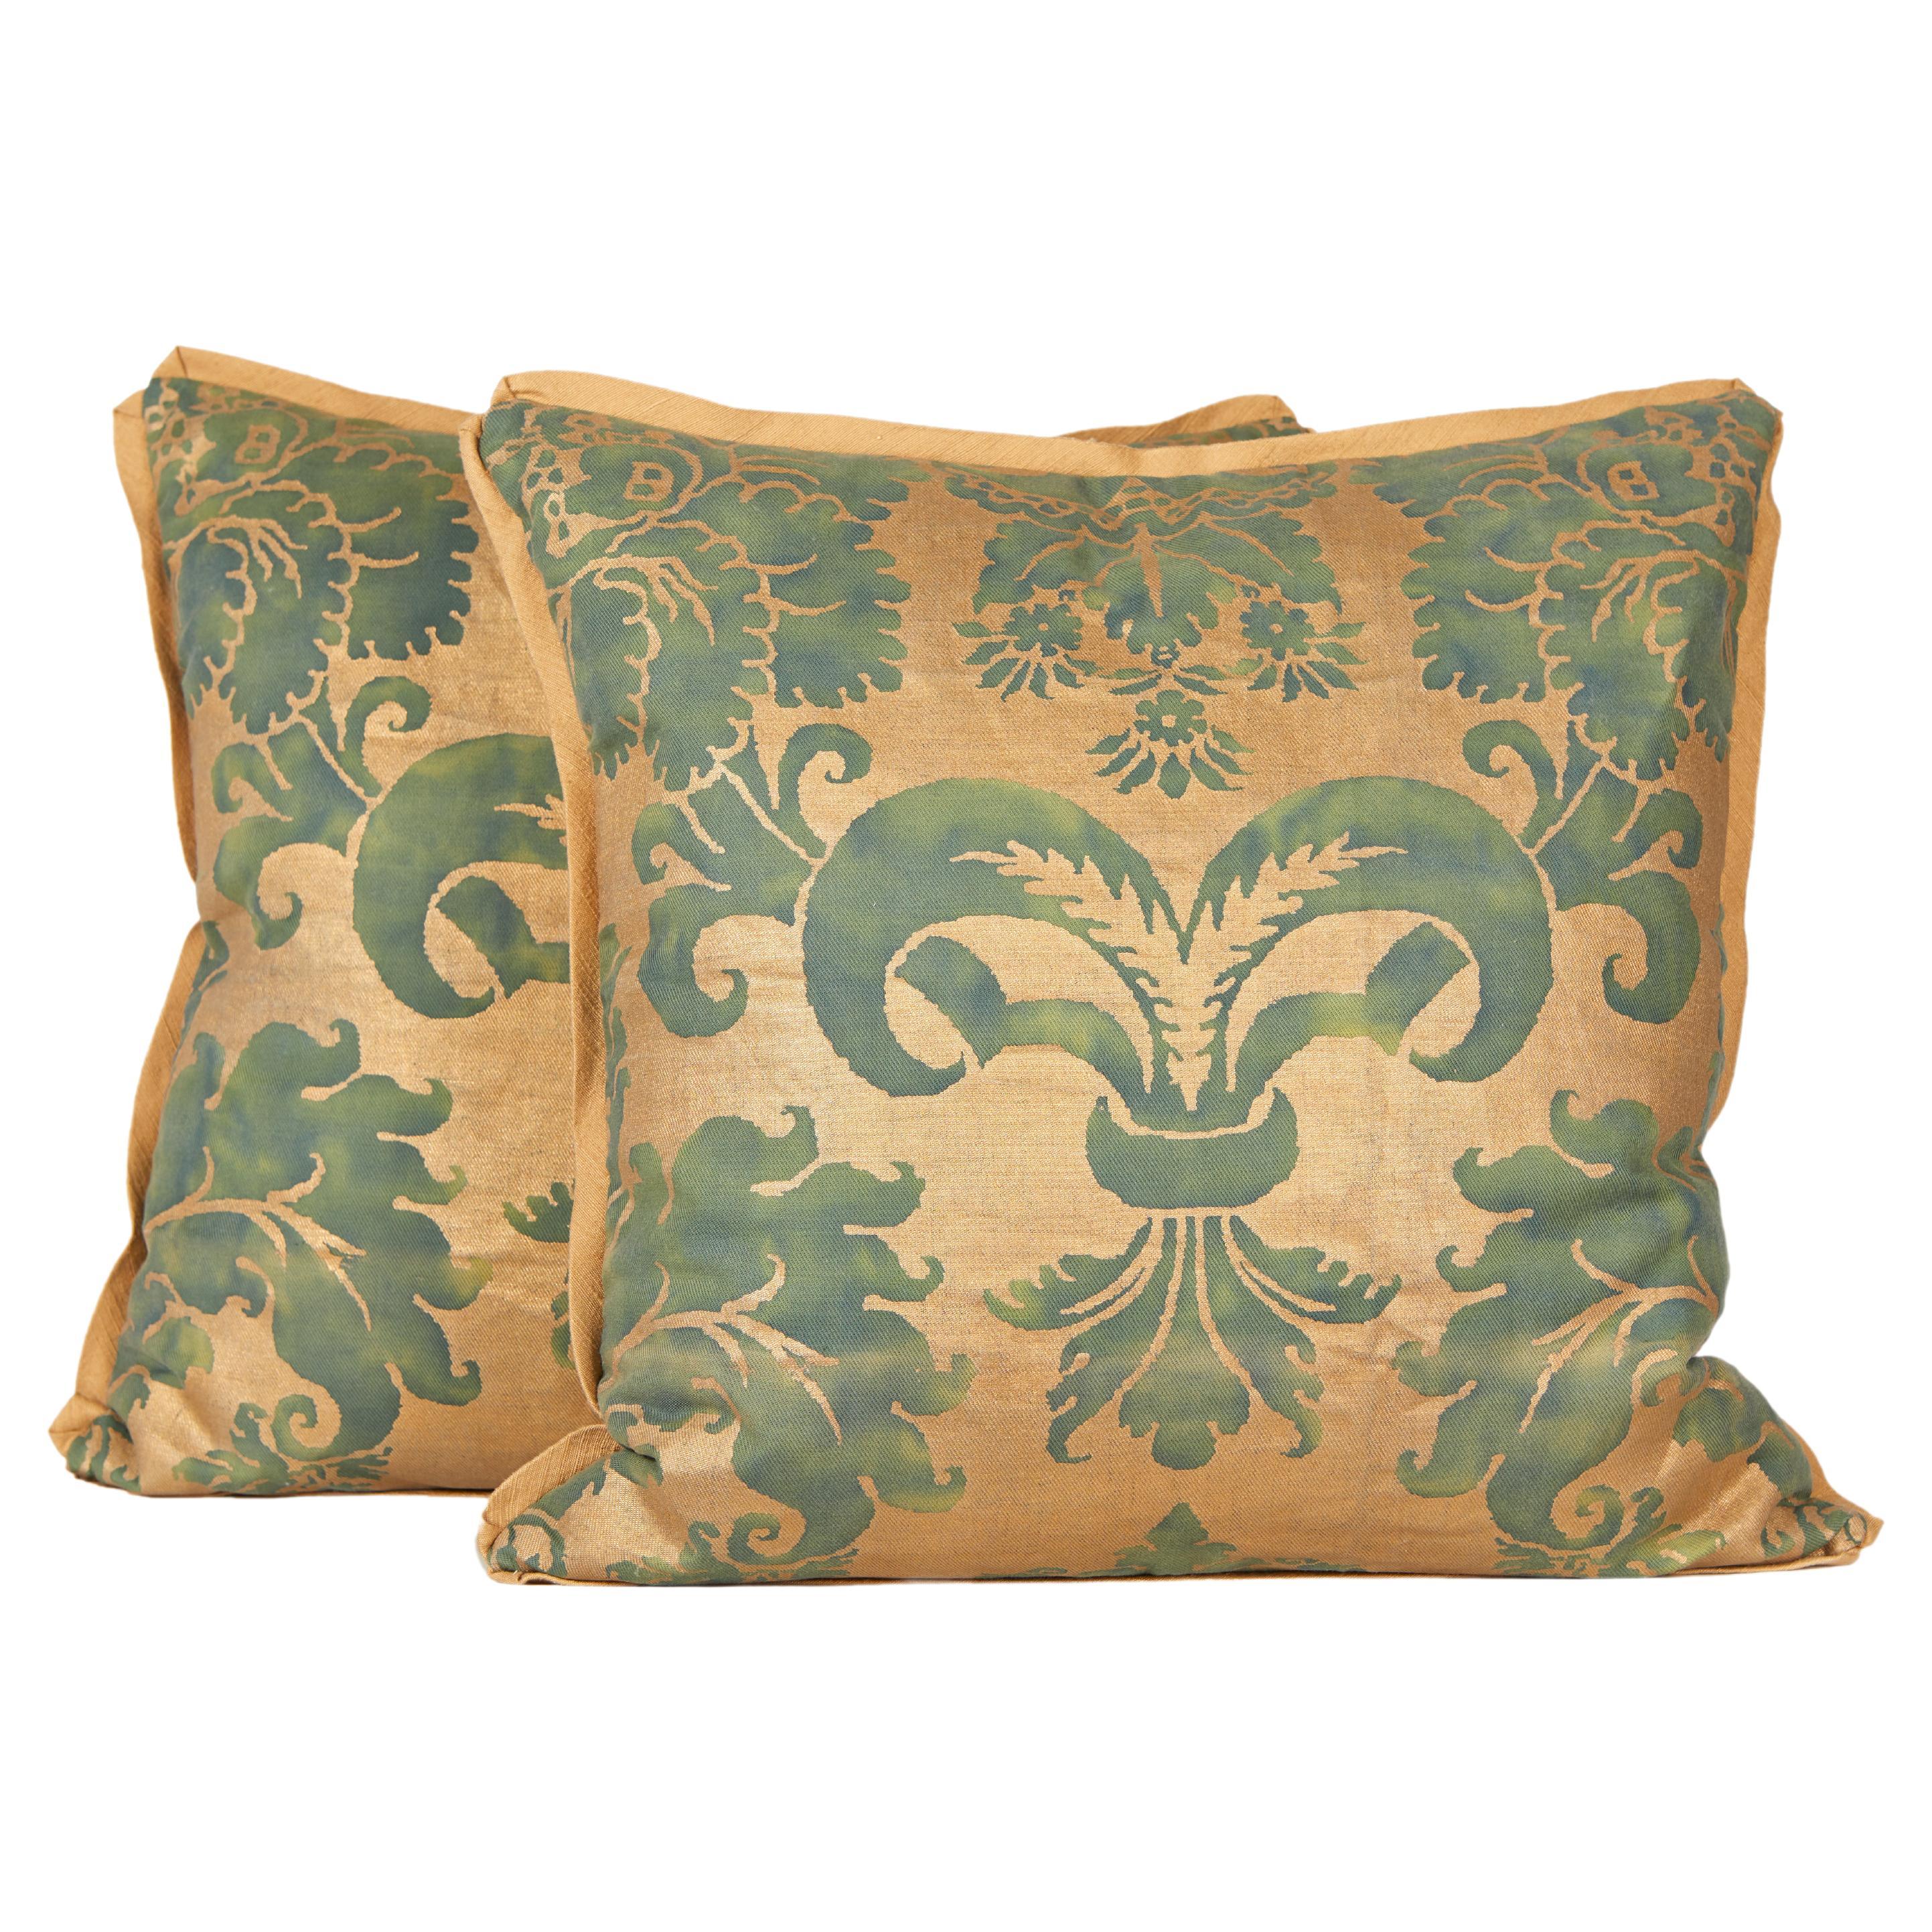 Pair of Fortuny Fabric Cushions in the Glicine Pattern in Gold and Blue-Green